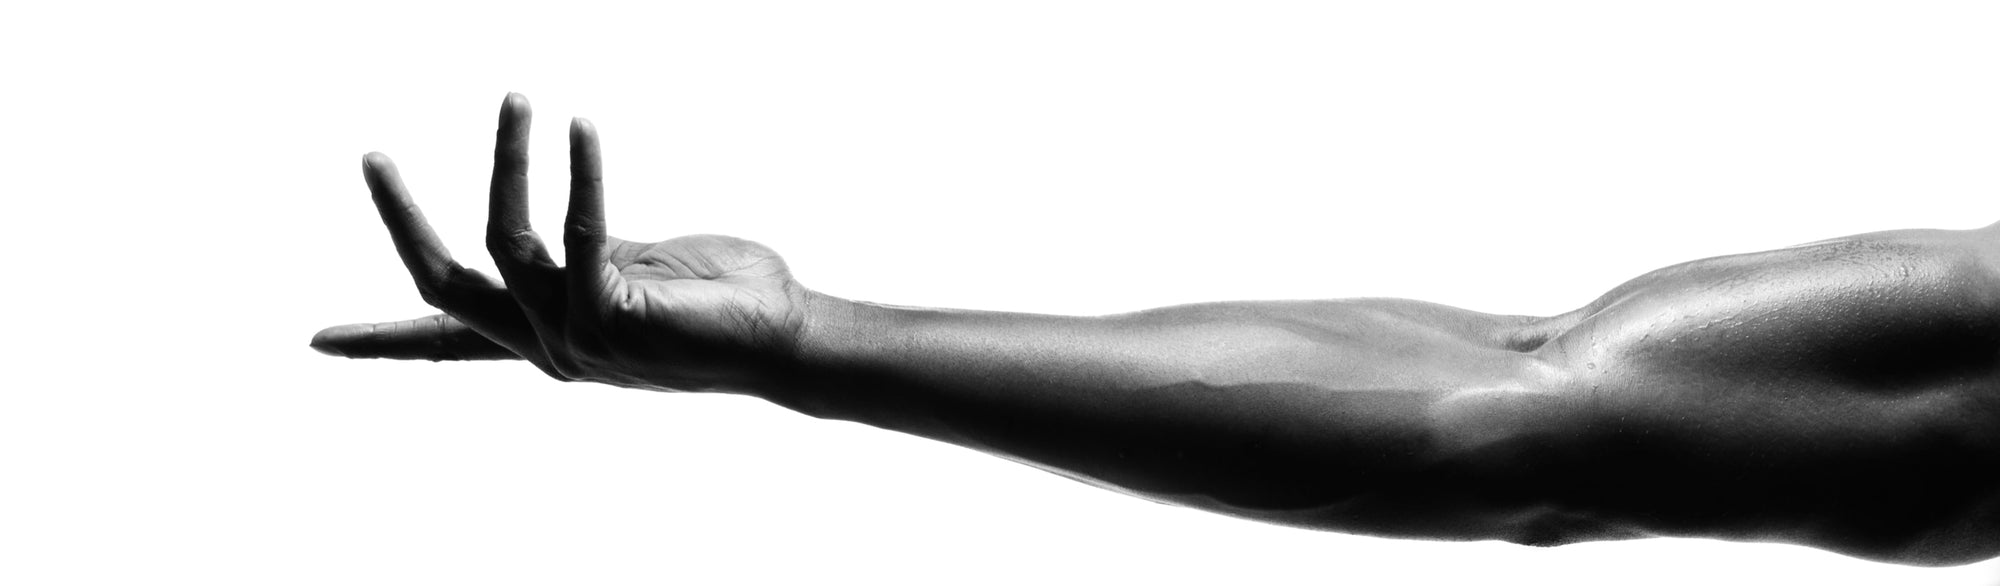 black and white photo with arm extended and stretched out with palm facing up and fingers flexed slightly on a white background